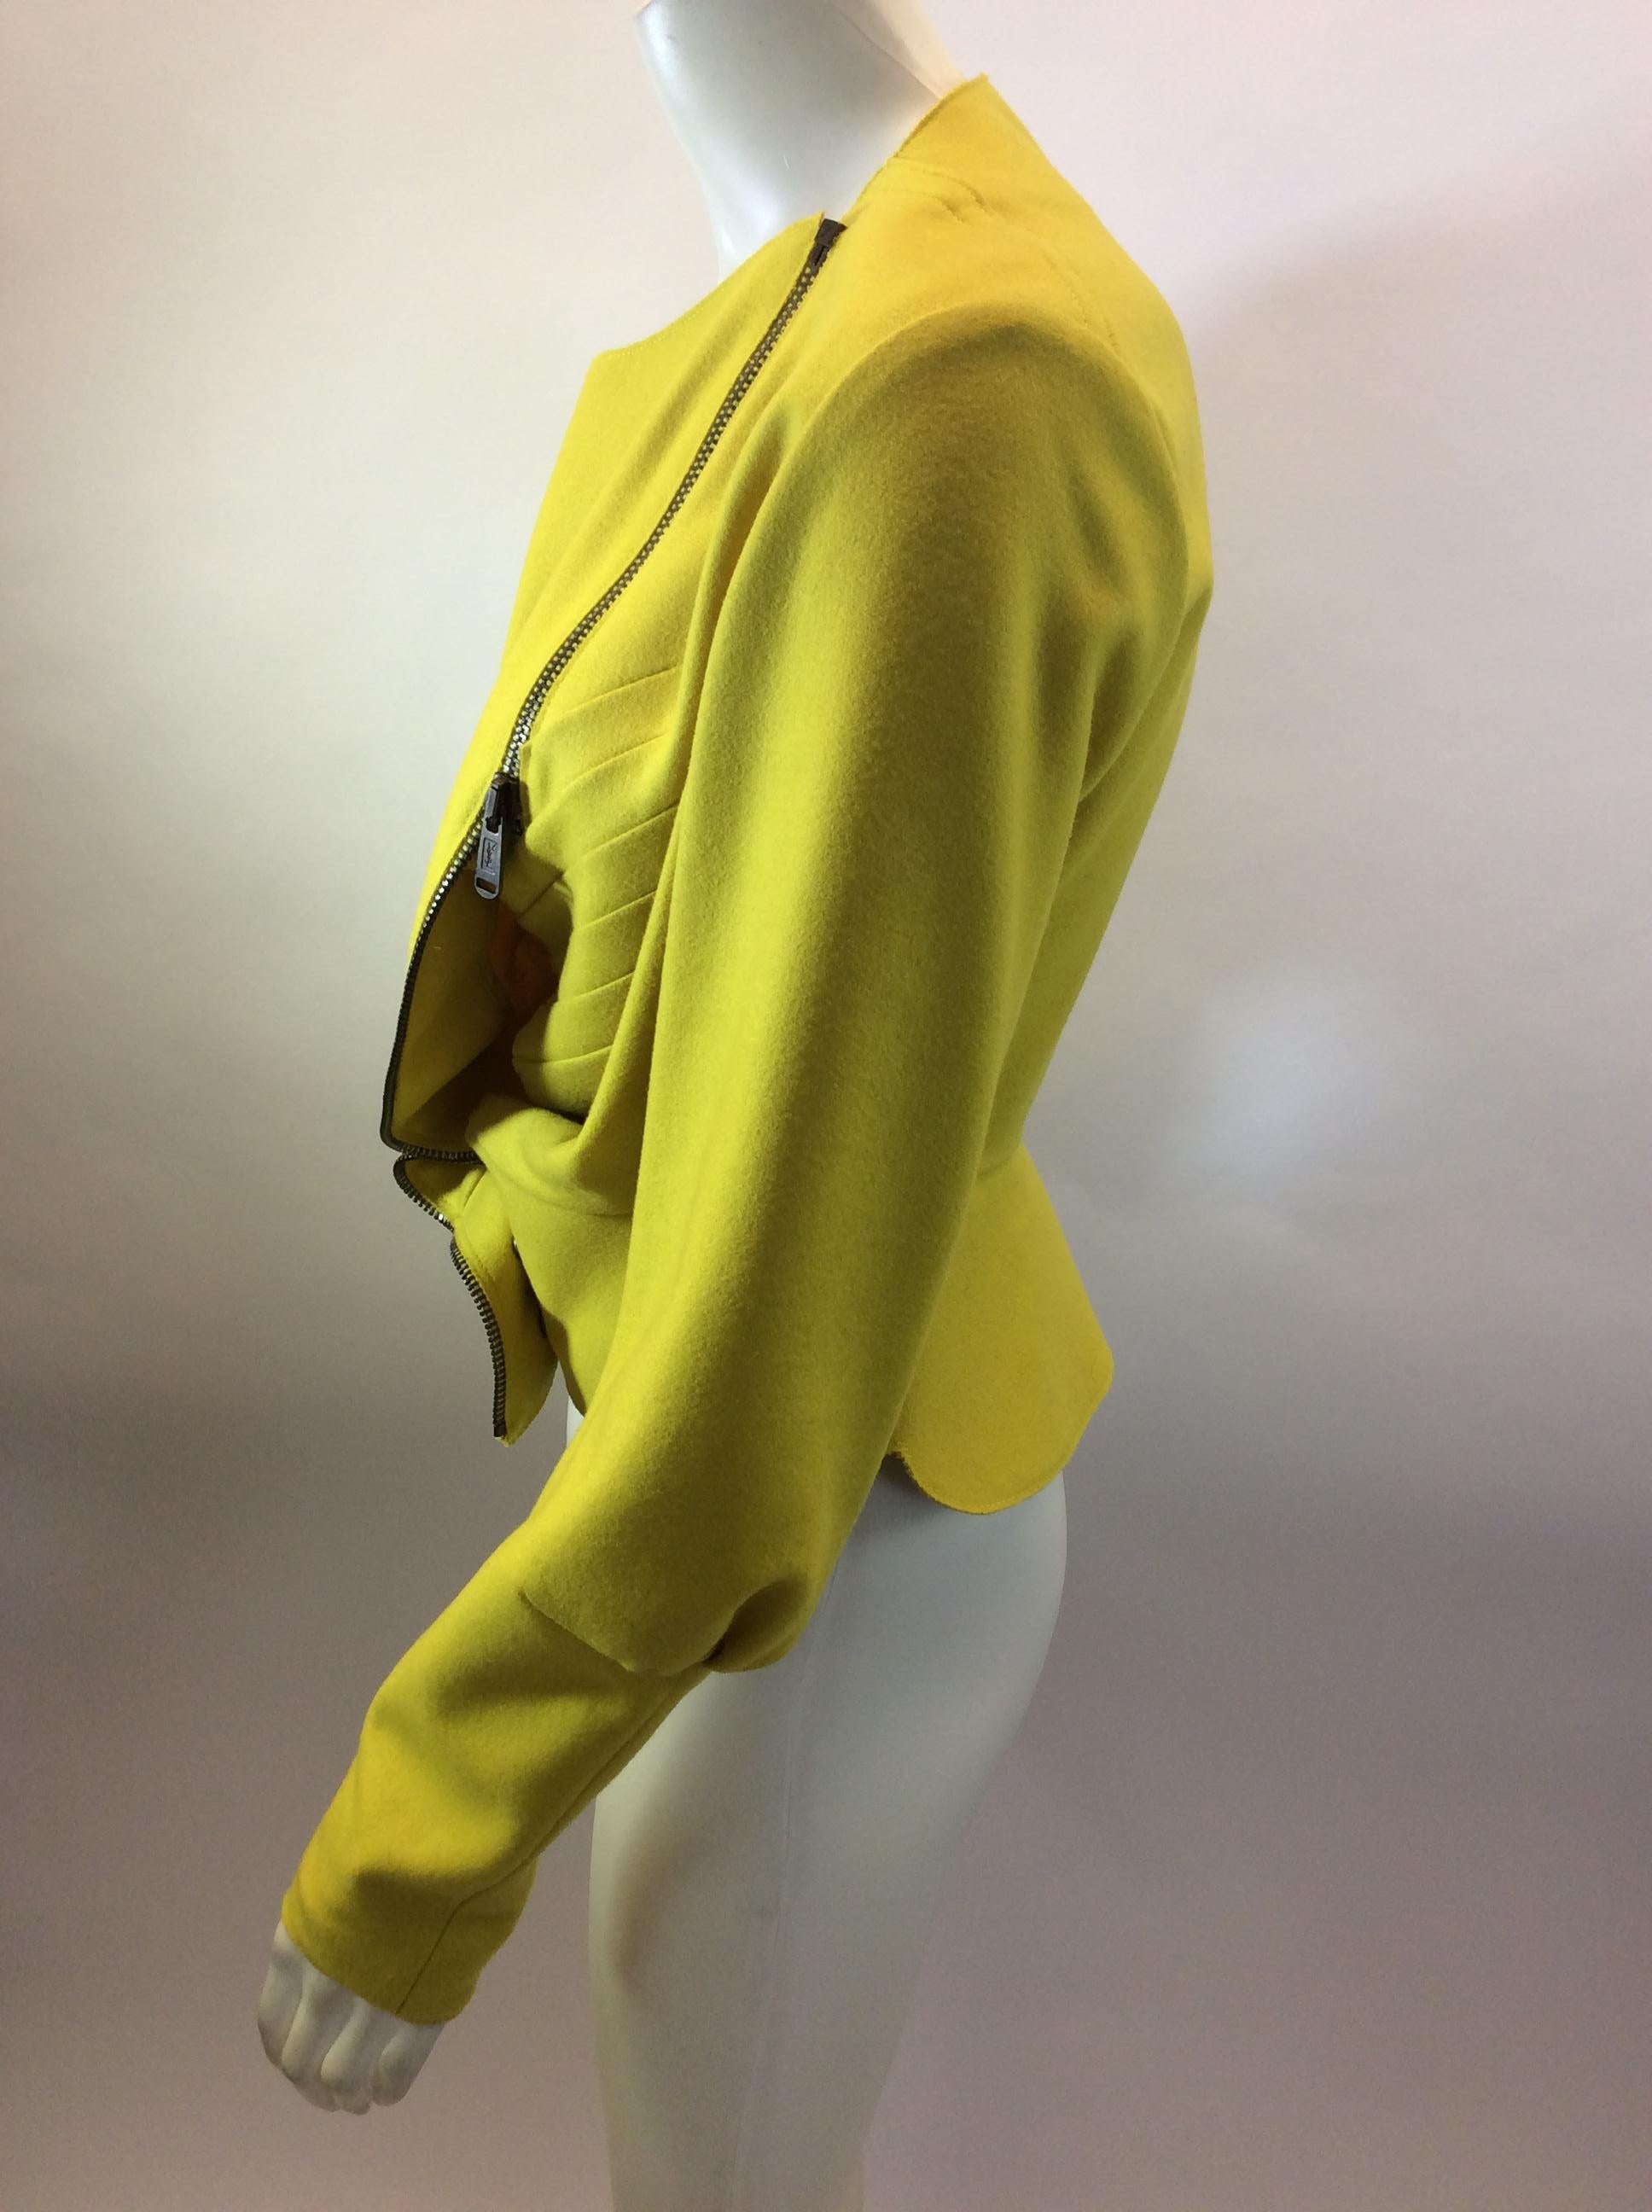 Yves Saint Laurent Yellow Wool Jacket NWT
$350
Made in France
82% Wool, 12% Angora, 6% Cashmere
Length 19